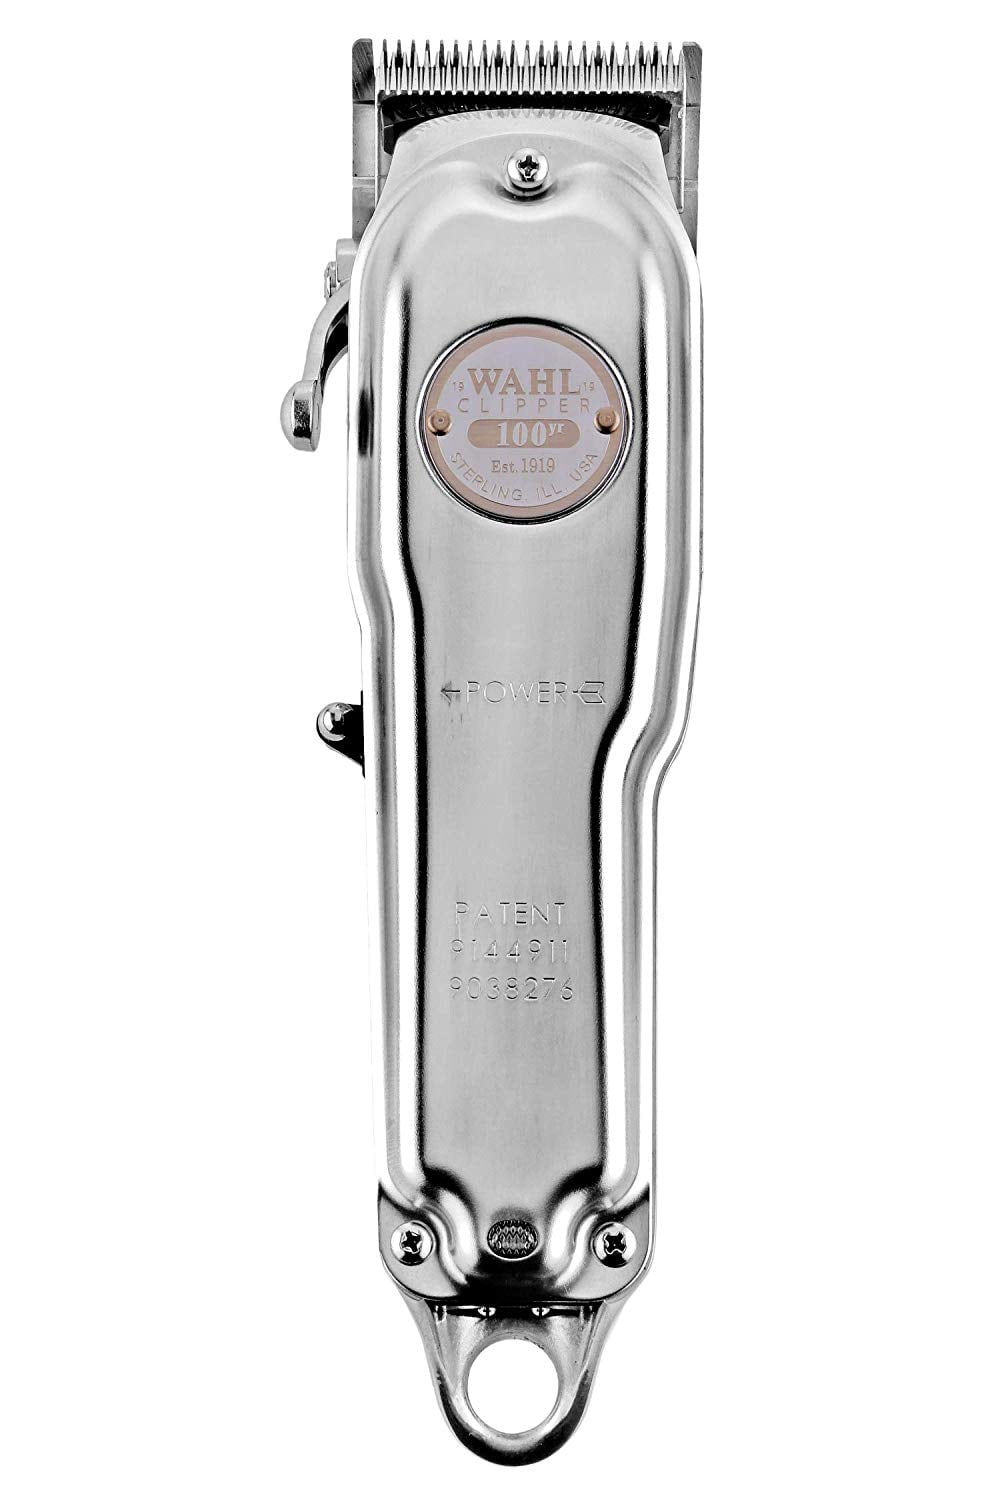 wahl professional cordless hair clippers